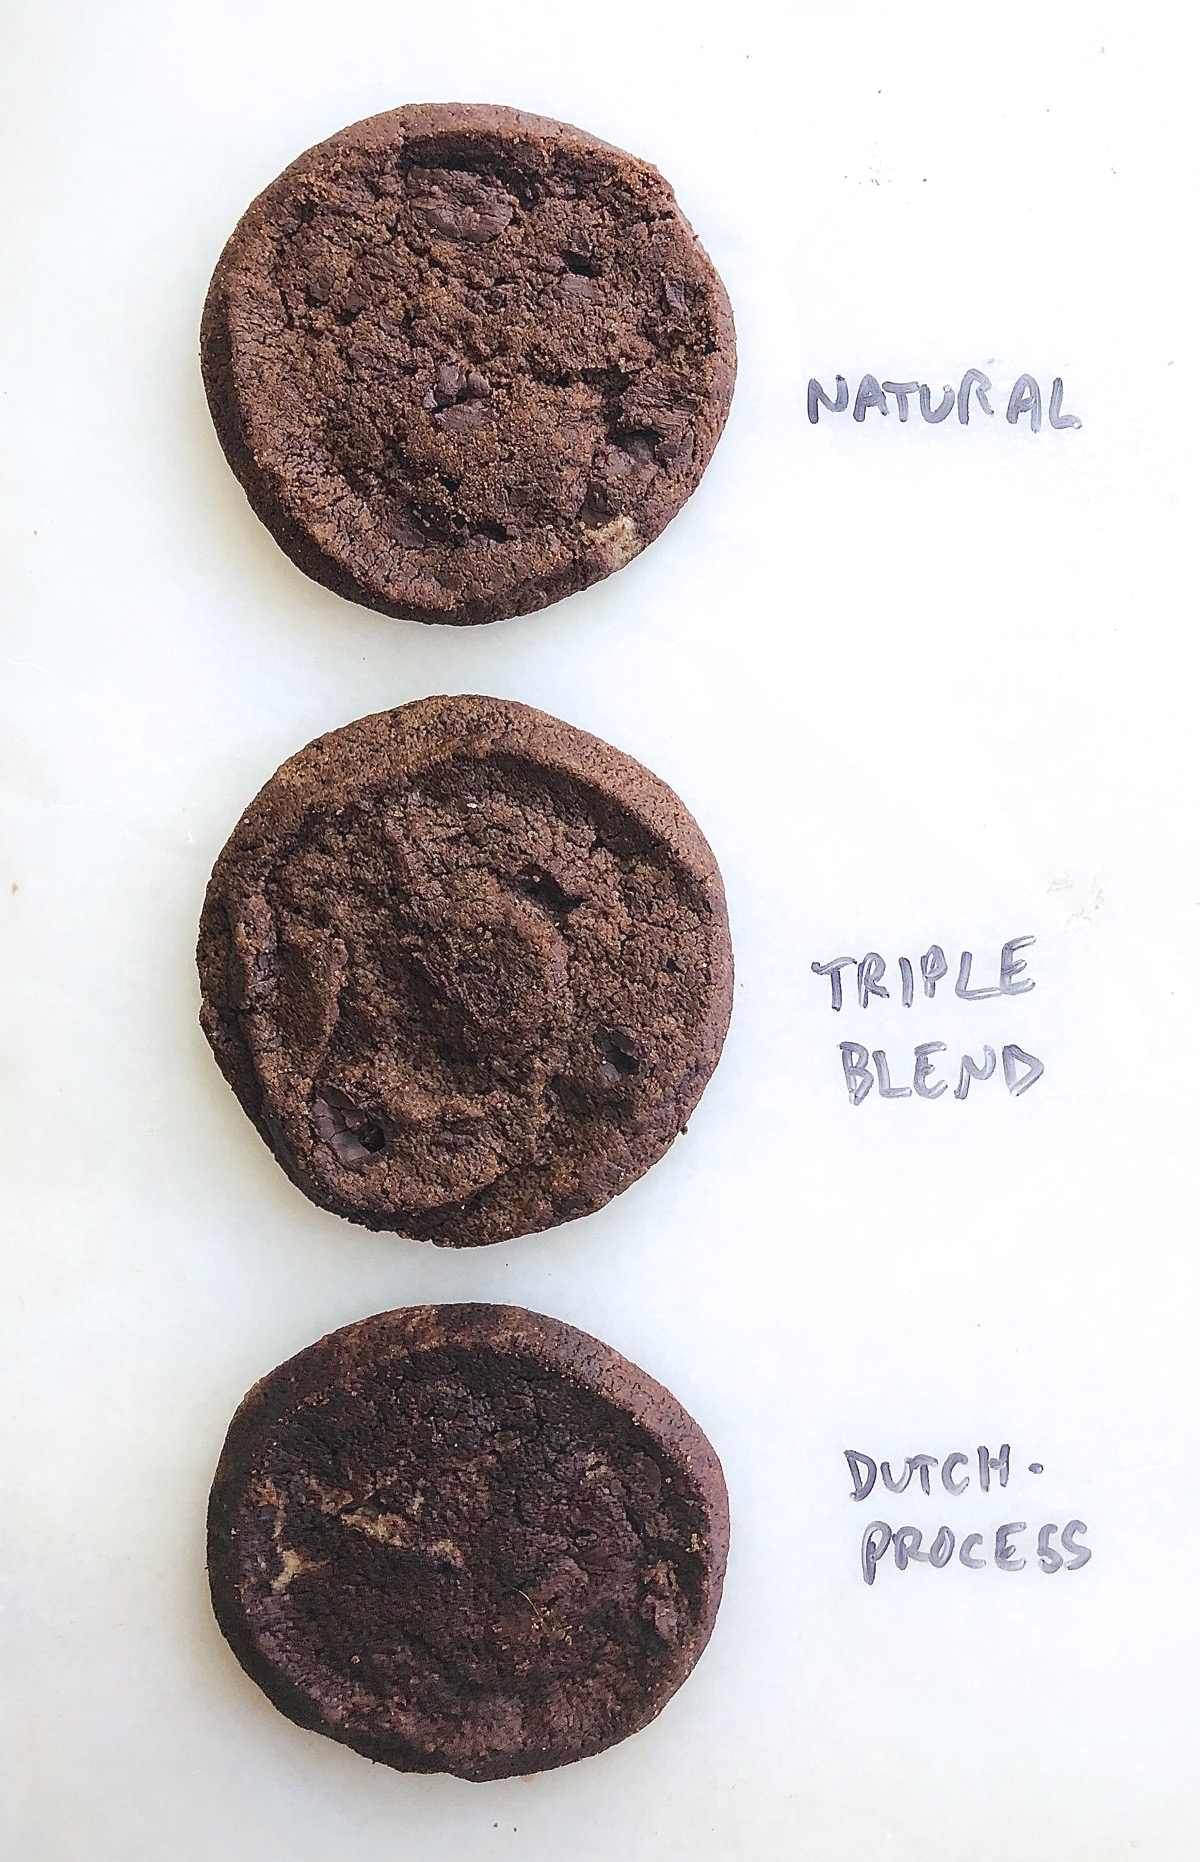 Chocolate cookies baked with Dutch-process cocoa, natural cocoa, and Triple Blend cocoa